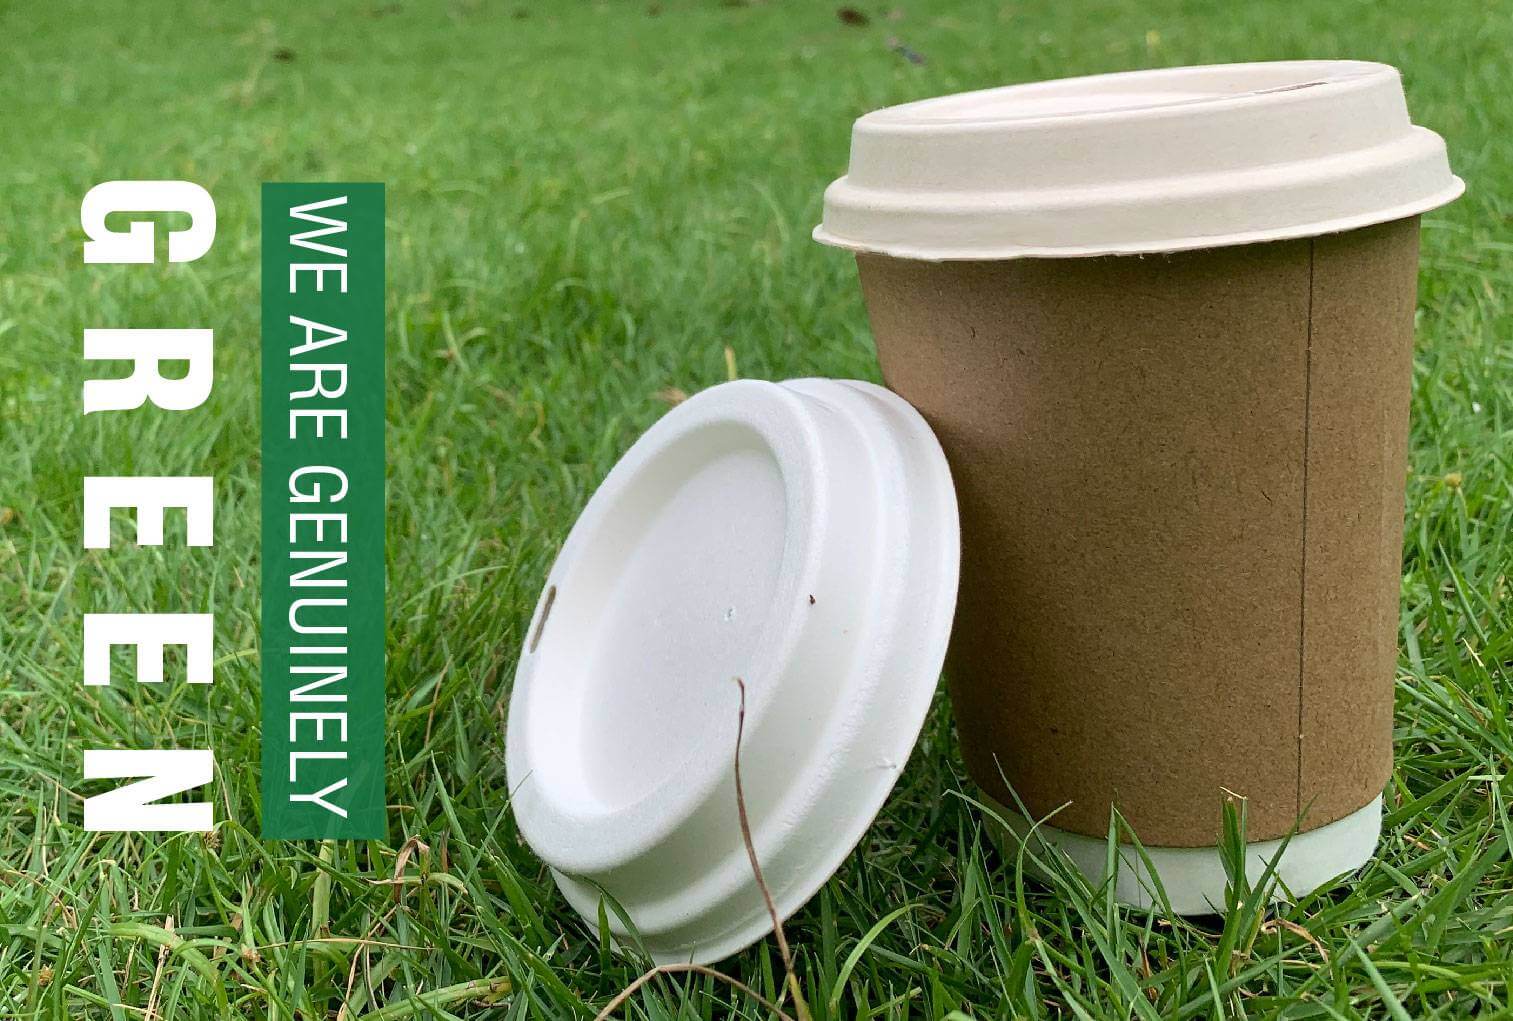 How to use Custom paper lids for coffee cups to protect the environment